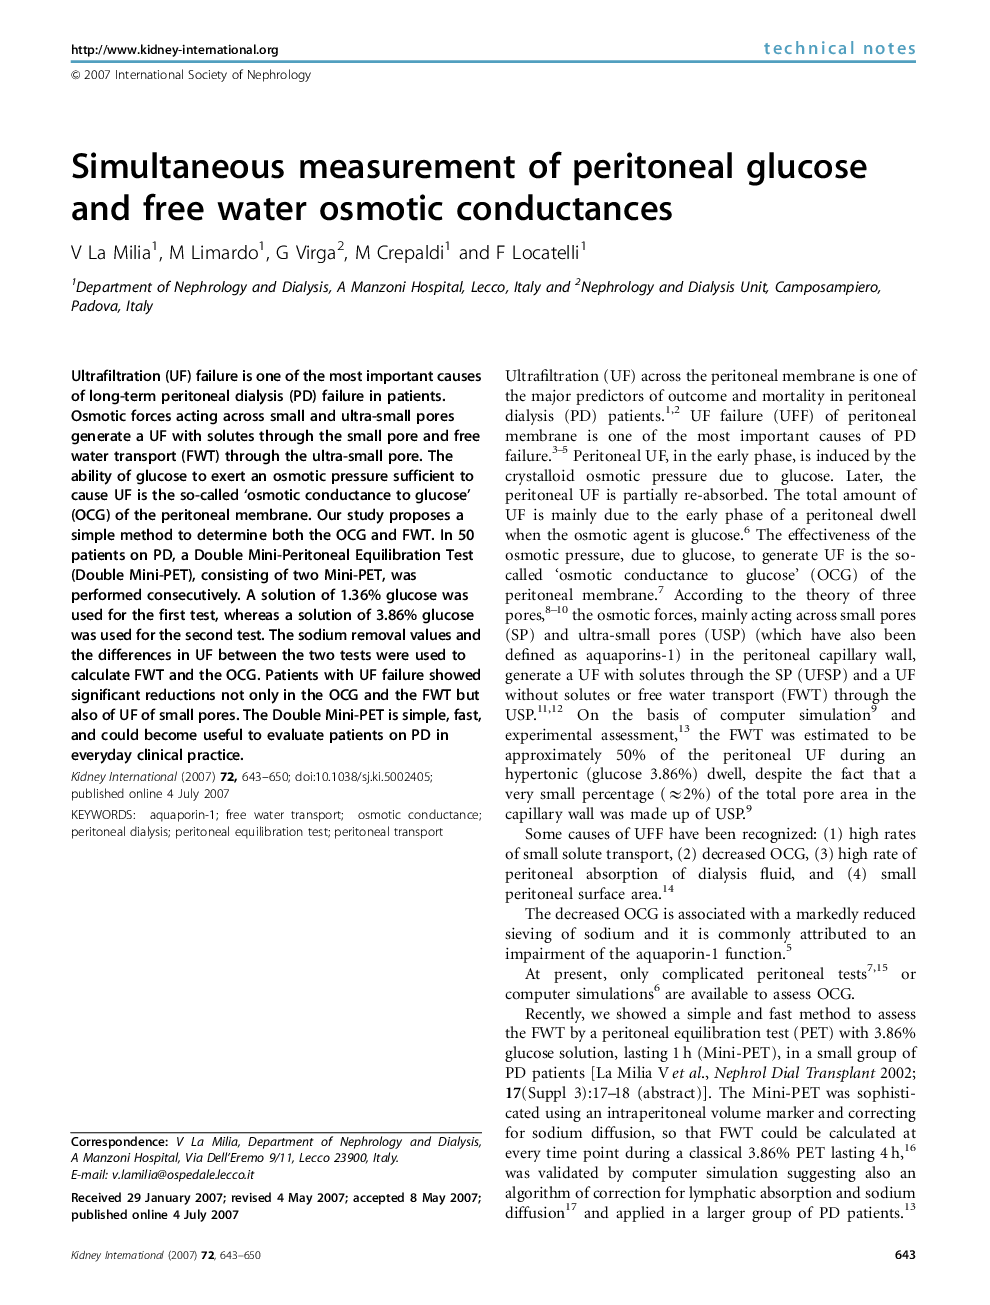 Simultaneous measurement of peritoneal glucose and free water osmotic conductances